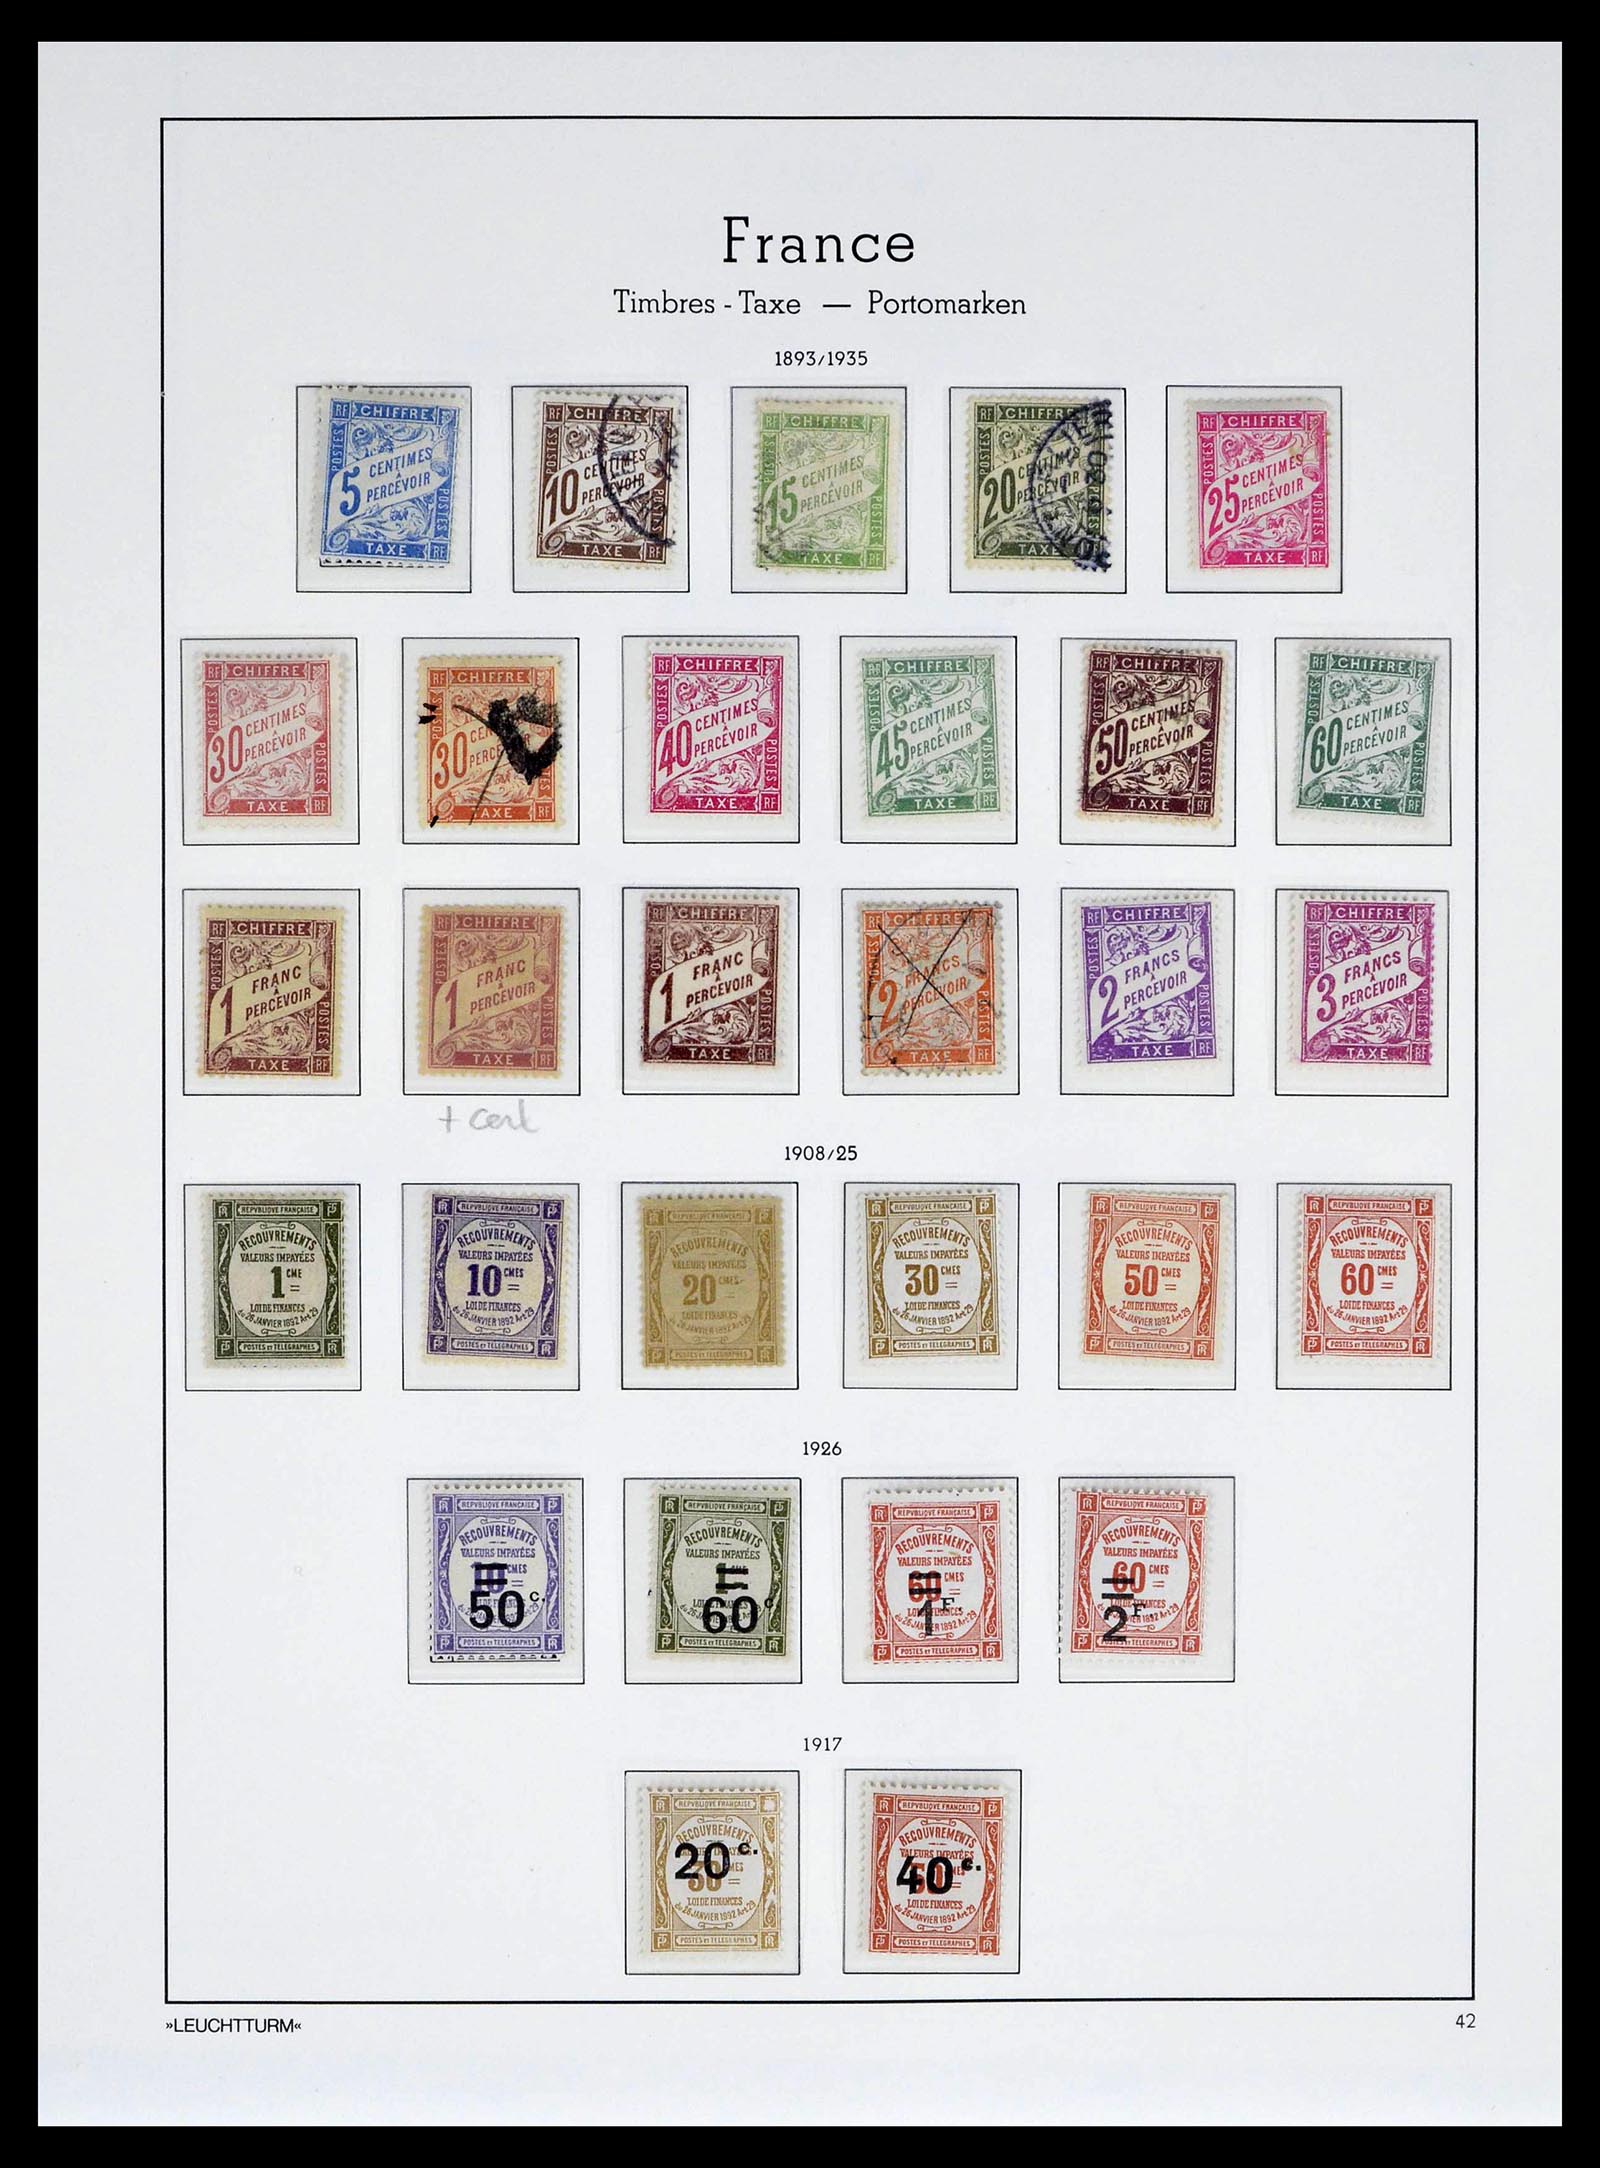 39408 0003 - Stamp collection 39408 France postage dues 1859-1946.